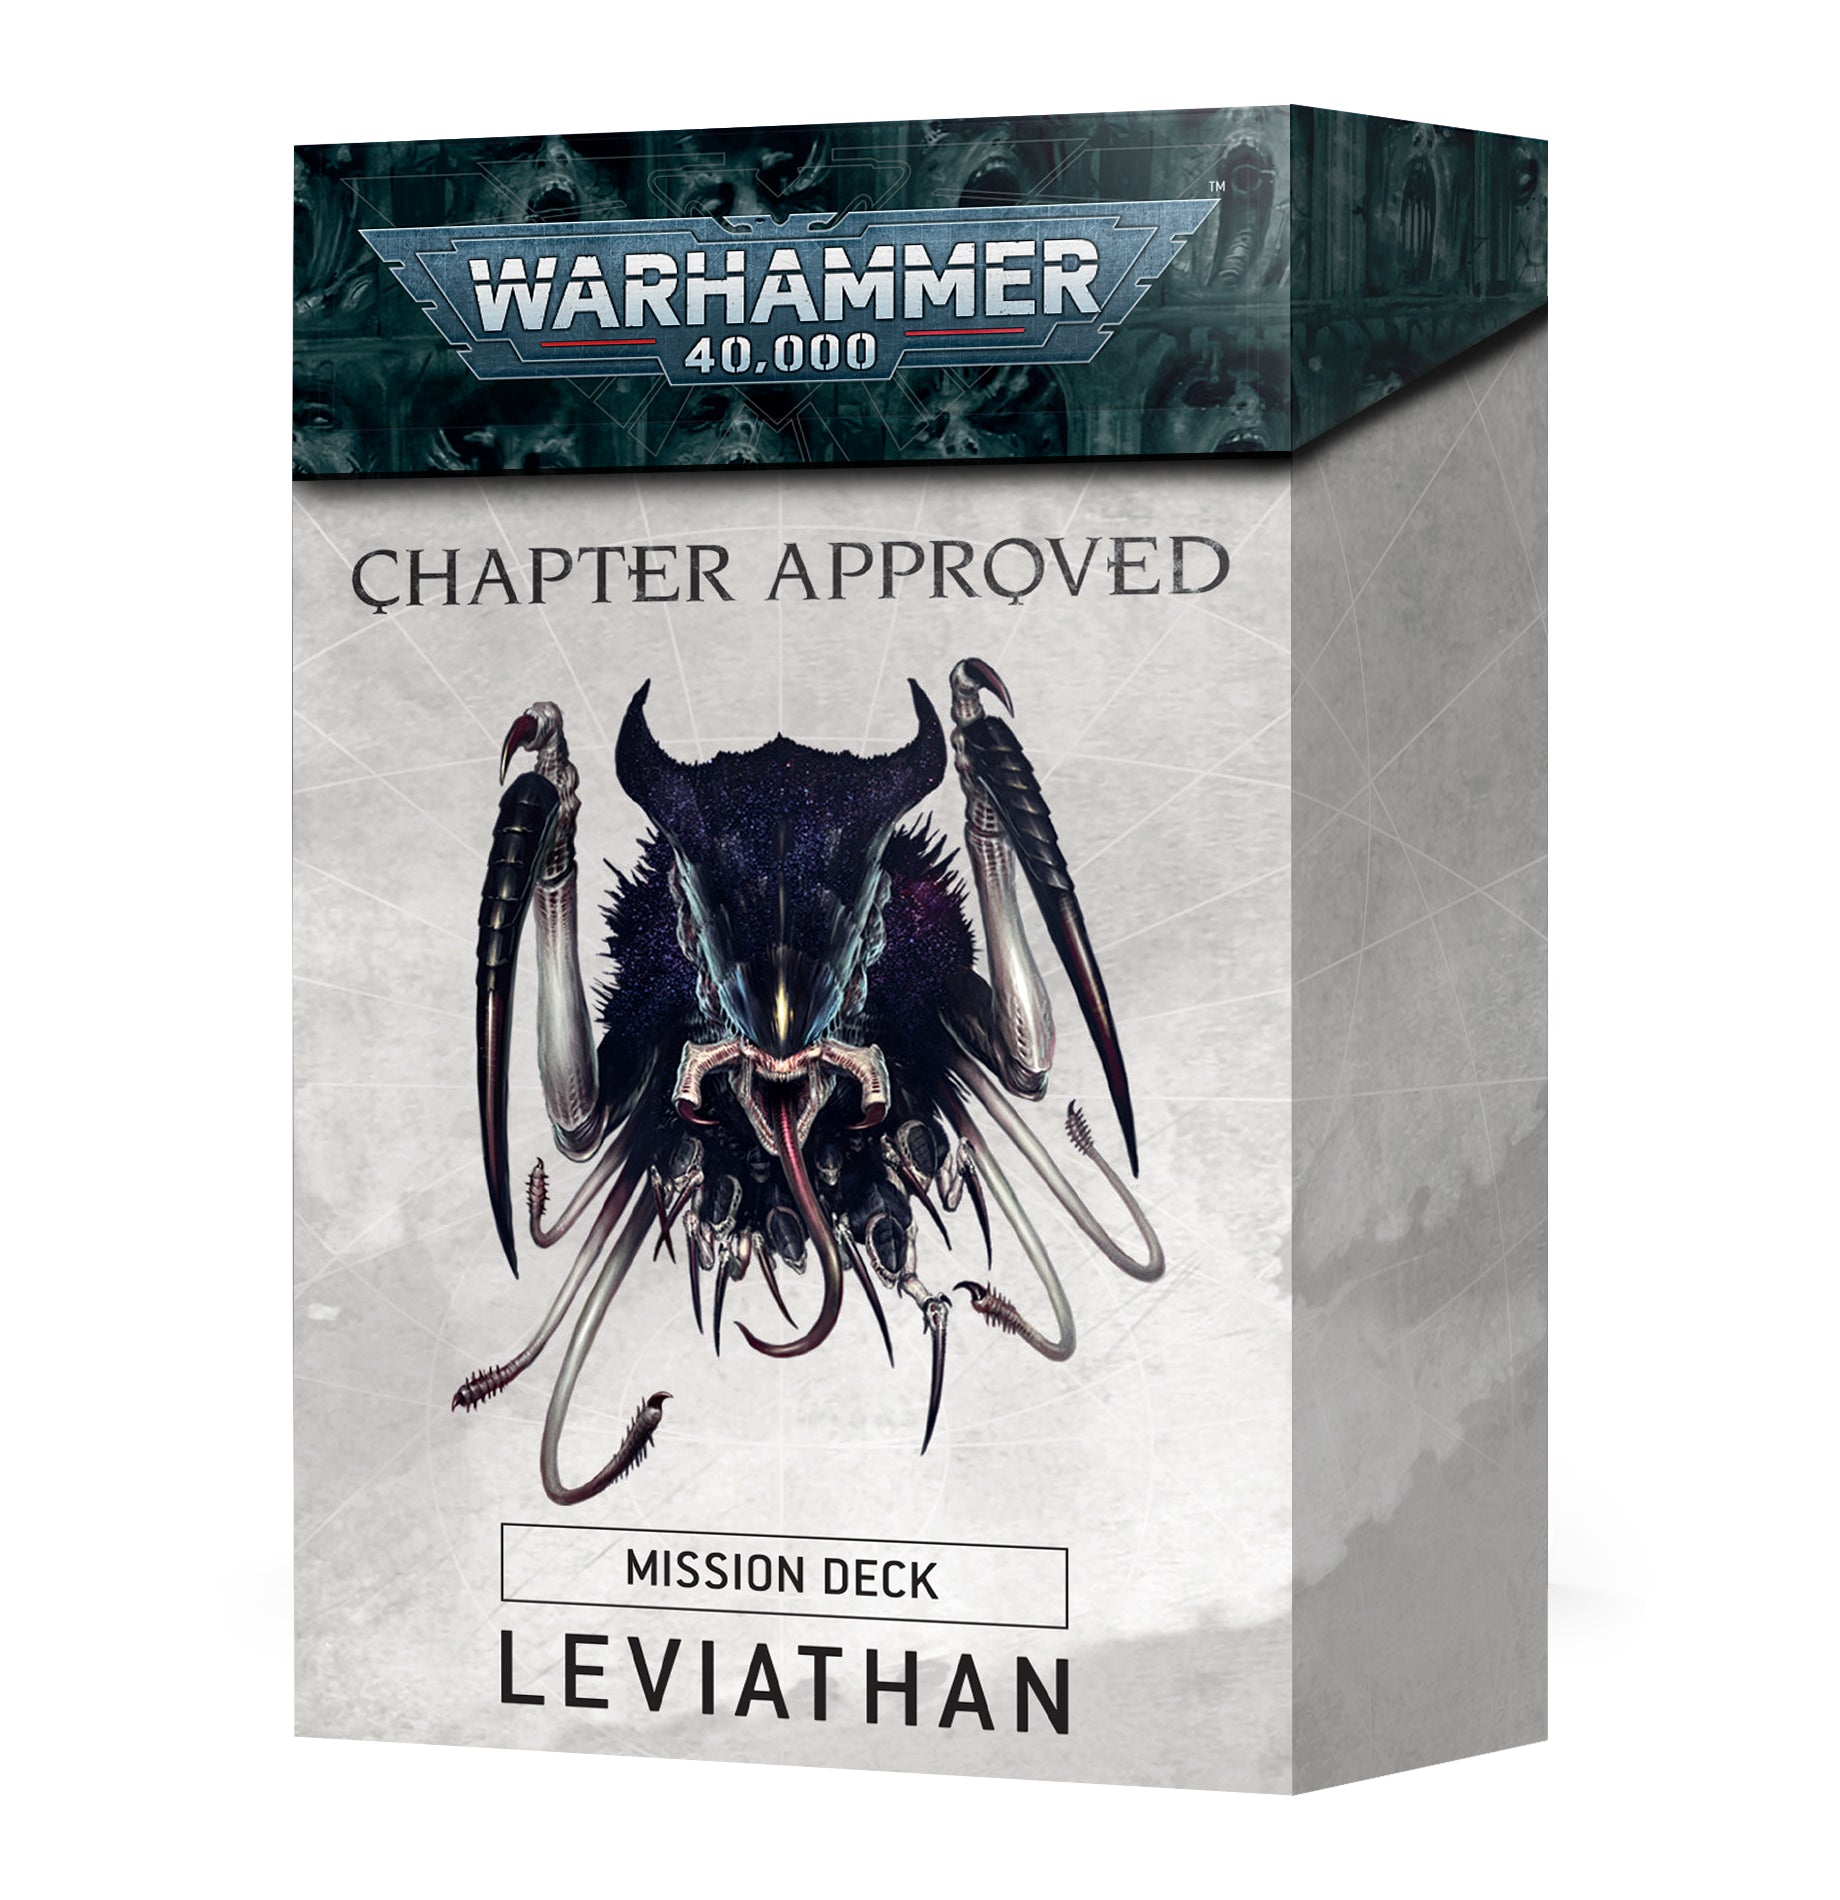 Warhammer 40,000: Chapter Approved - Leviathan Mission Deck